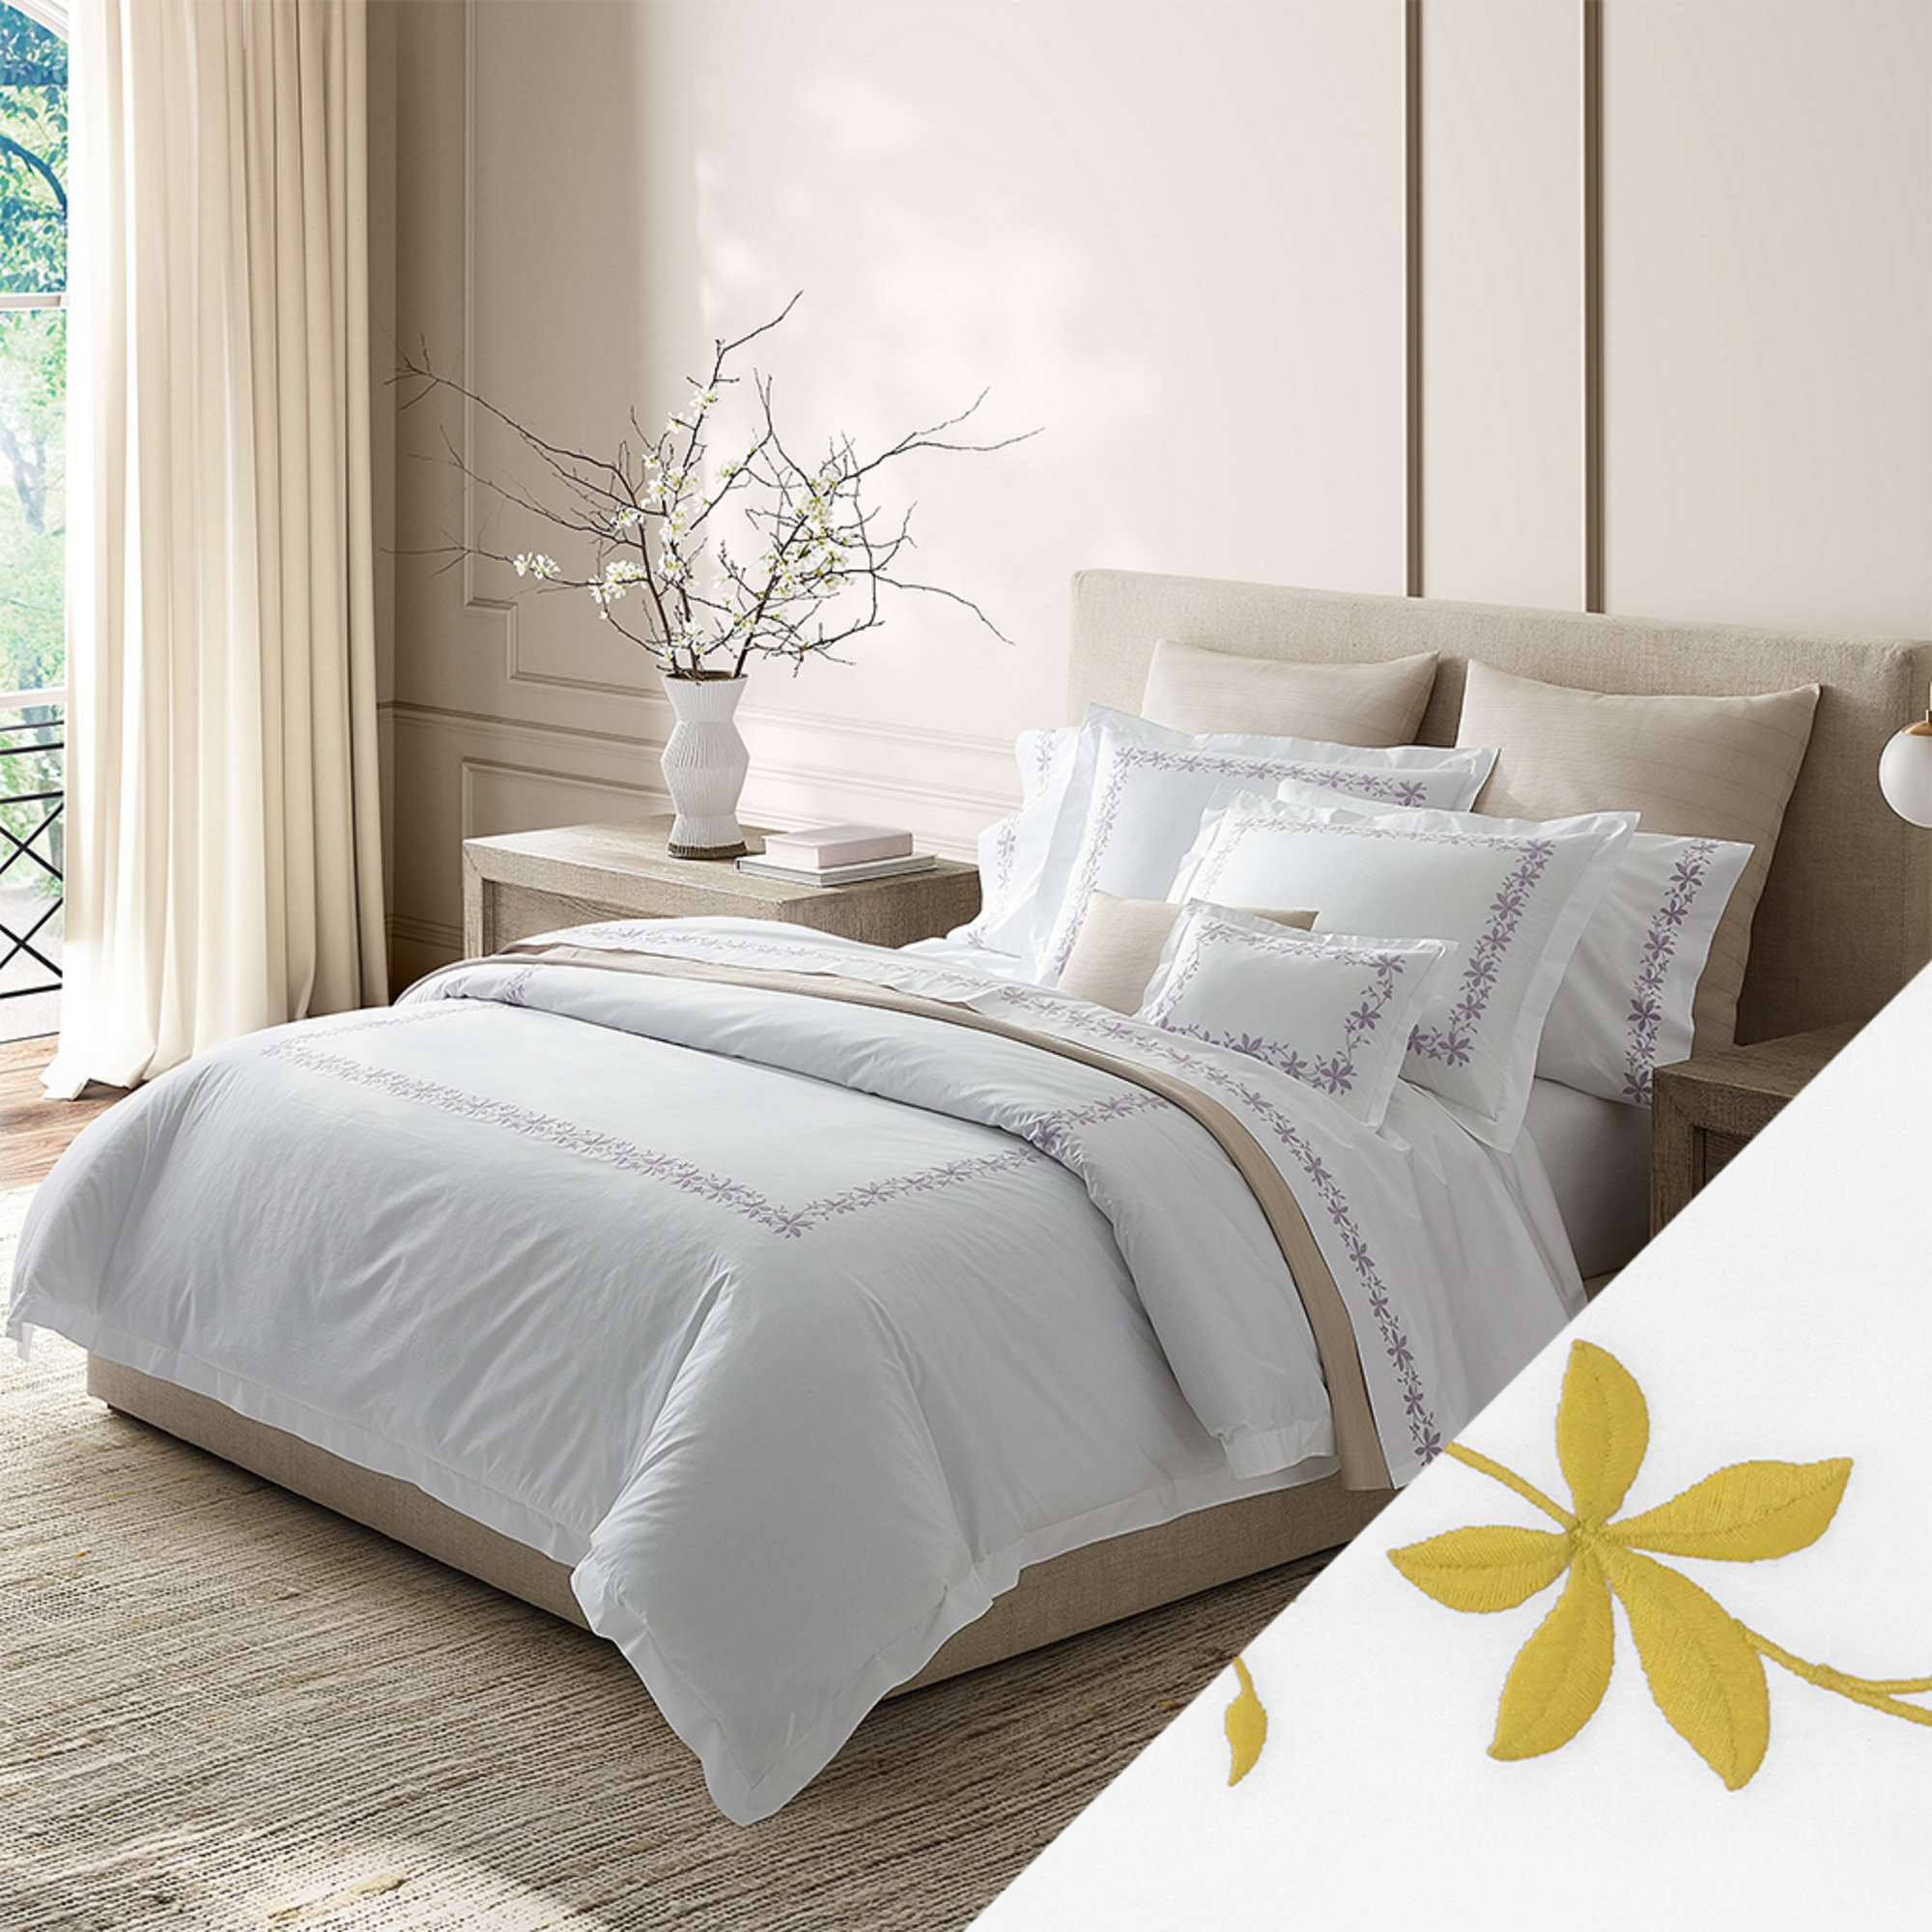 Horizontal View of Matouk Callista Bedding Collection with Swatch in Lemon Color